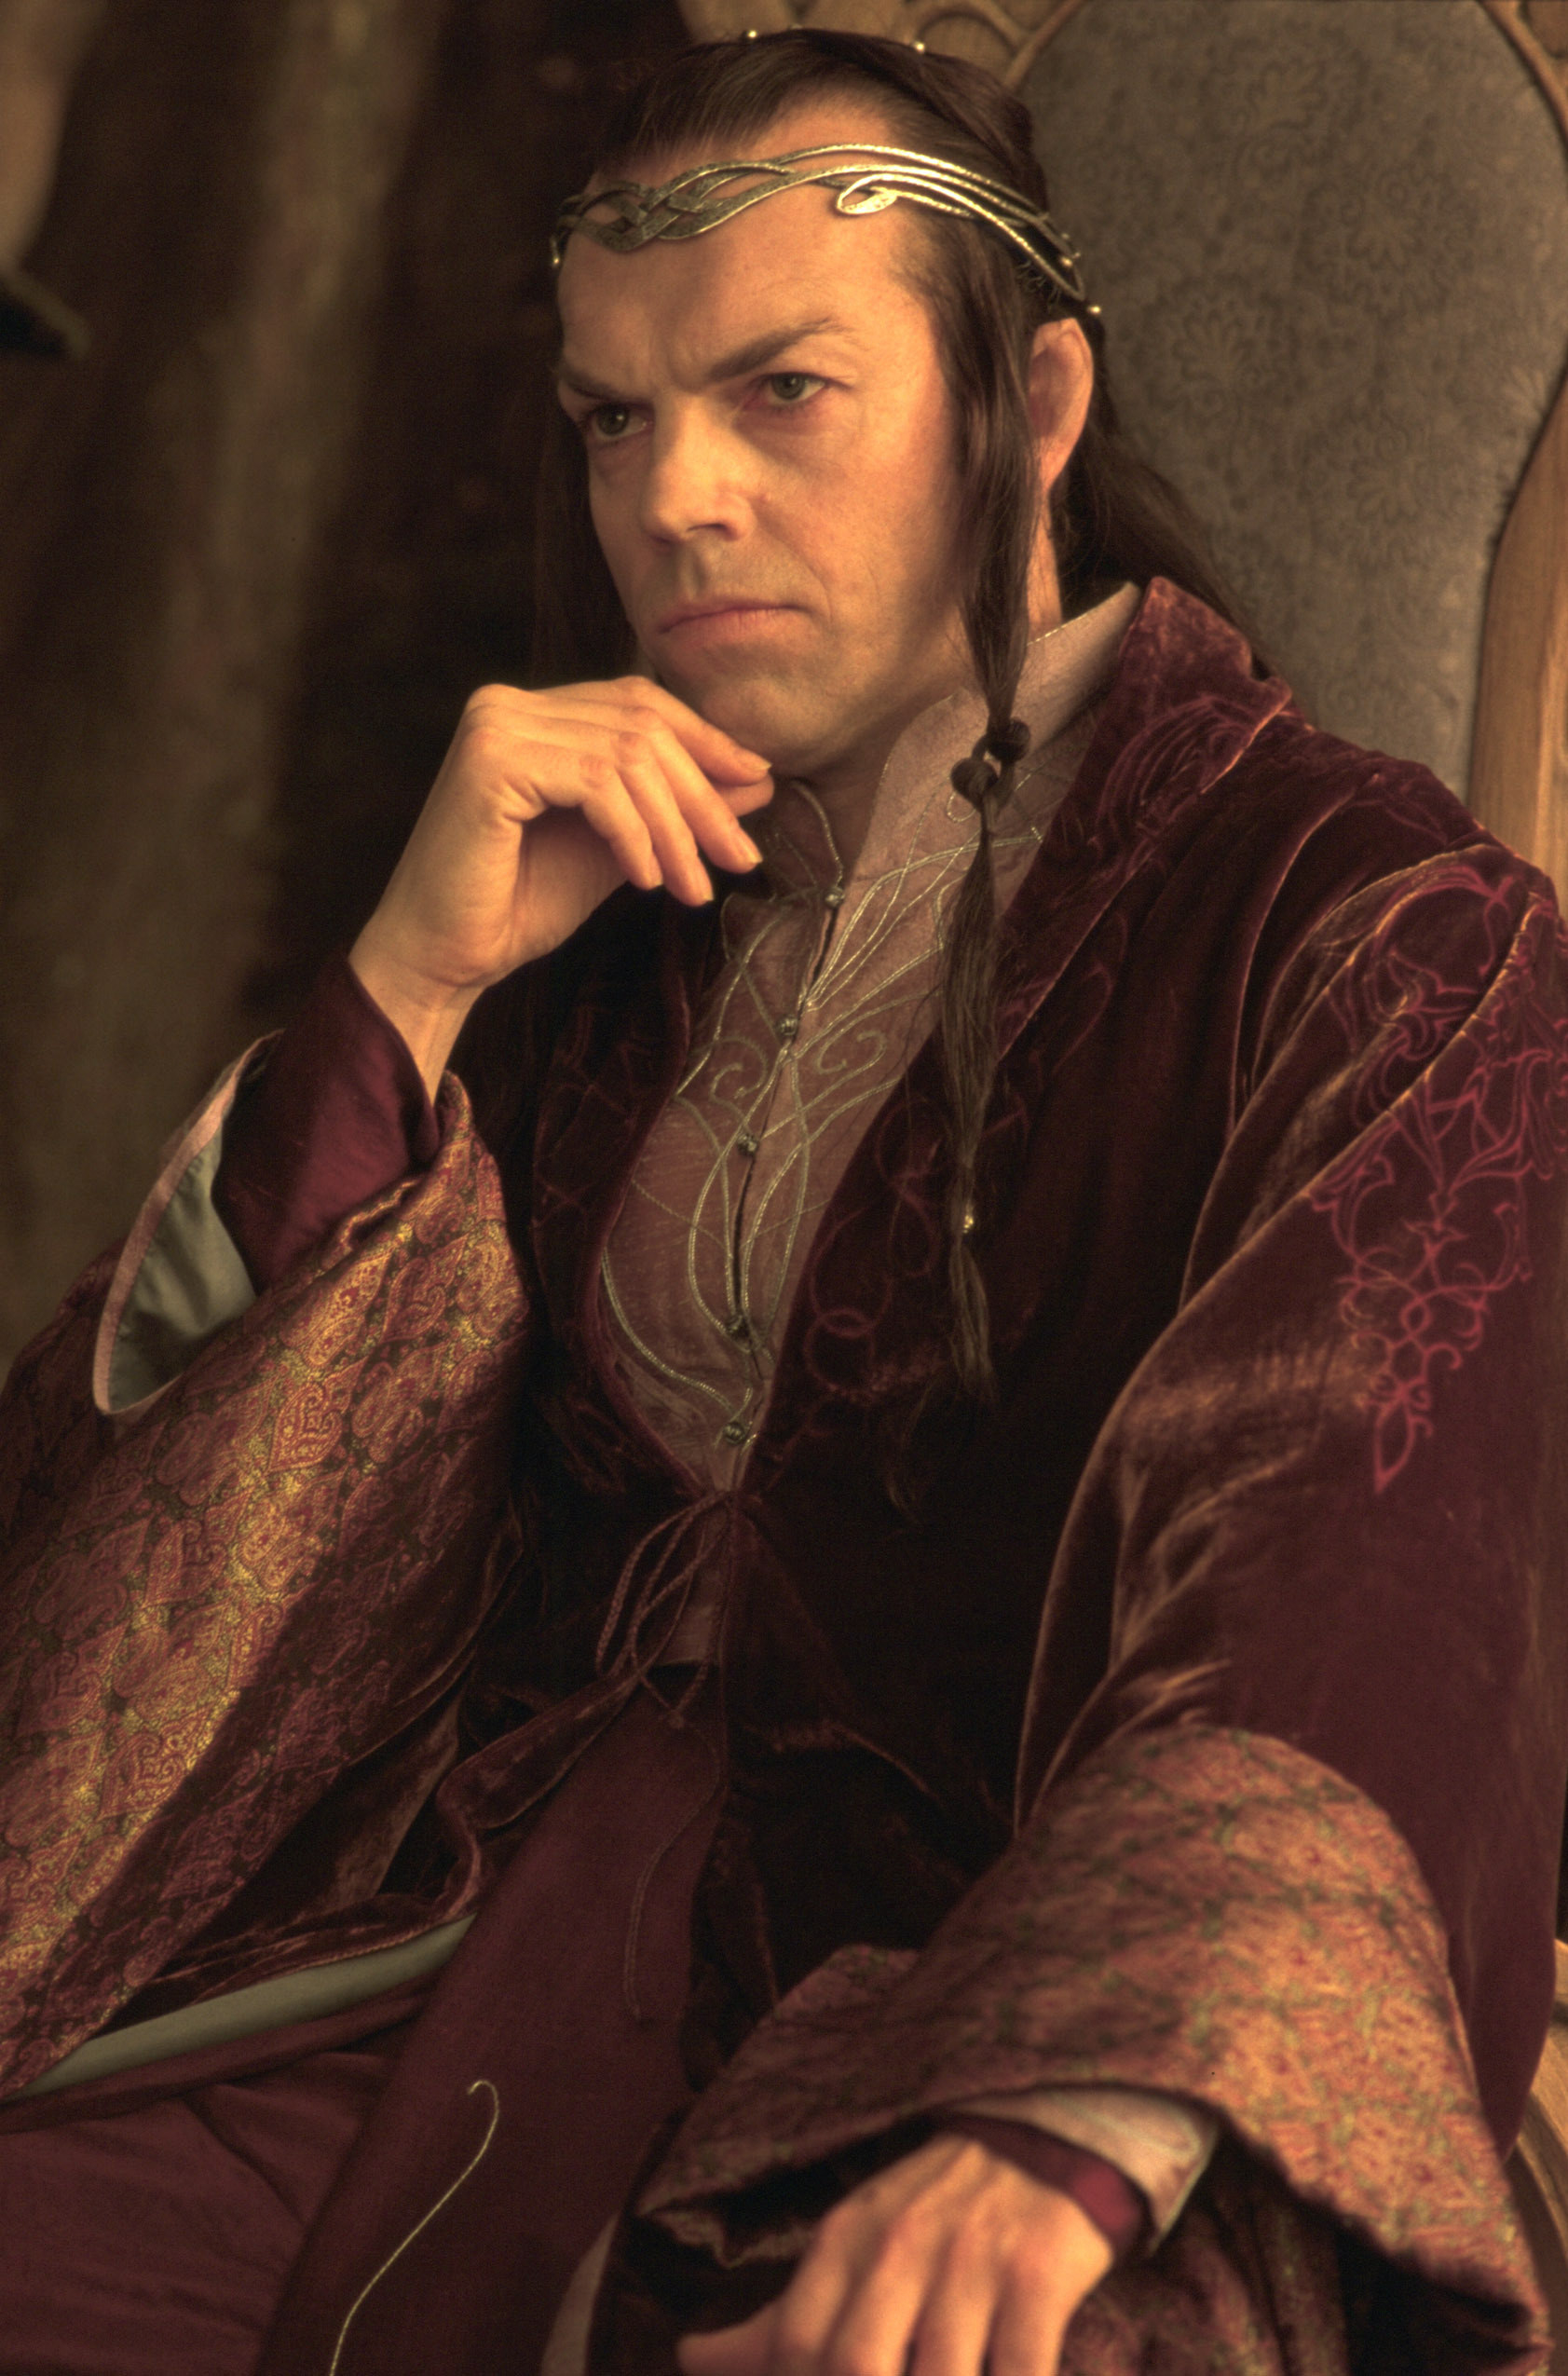 Hugo Weaving in The Lord of the Rings: The Fellowship of the Ring